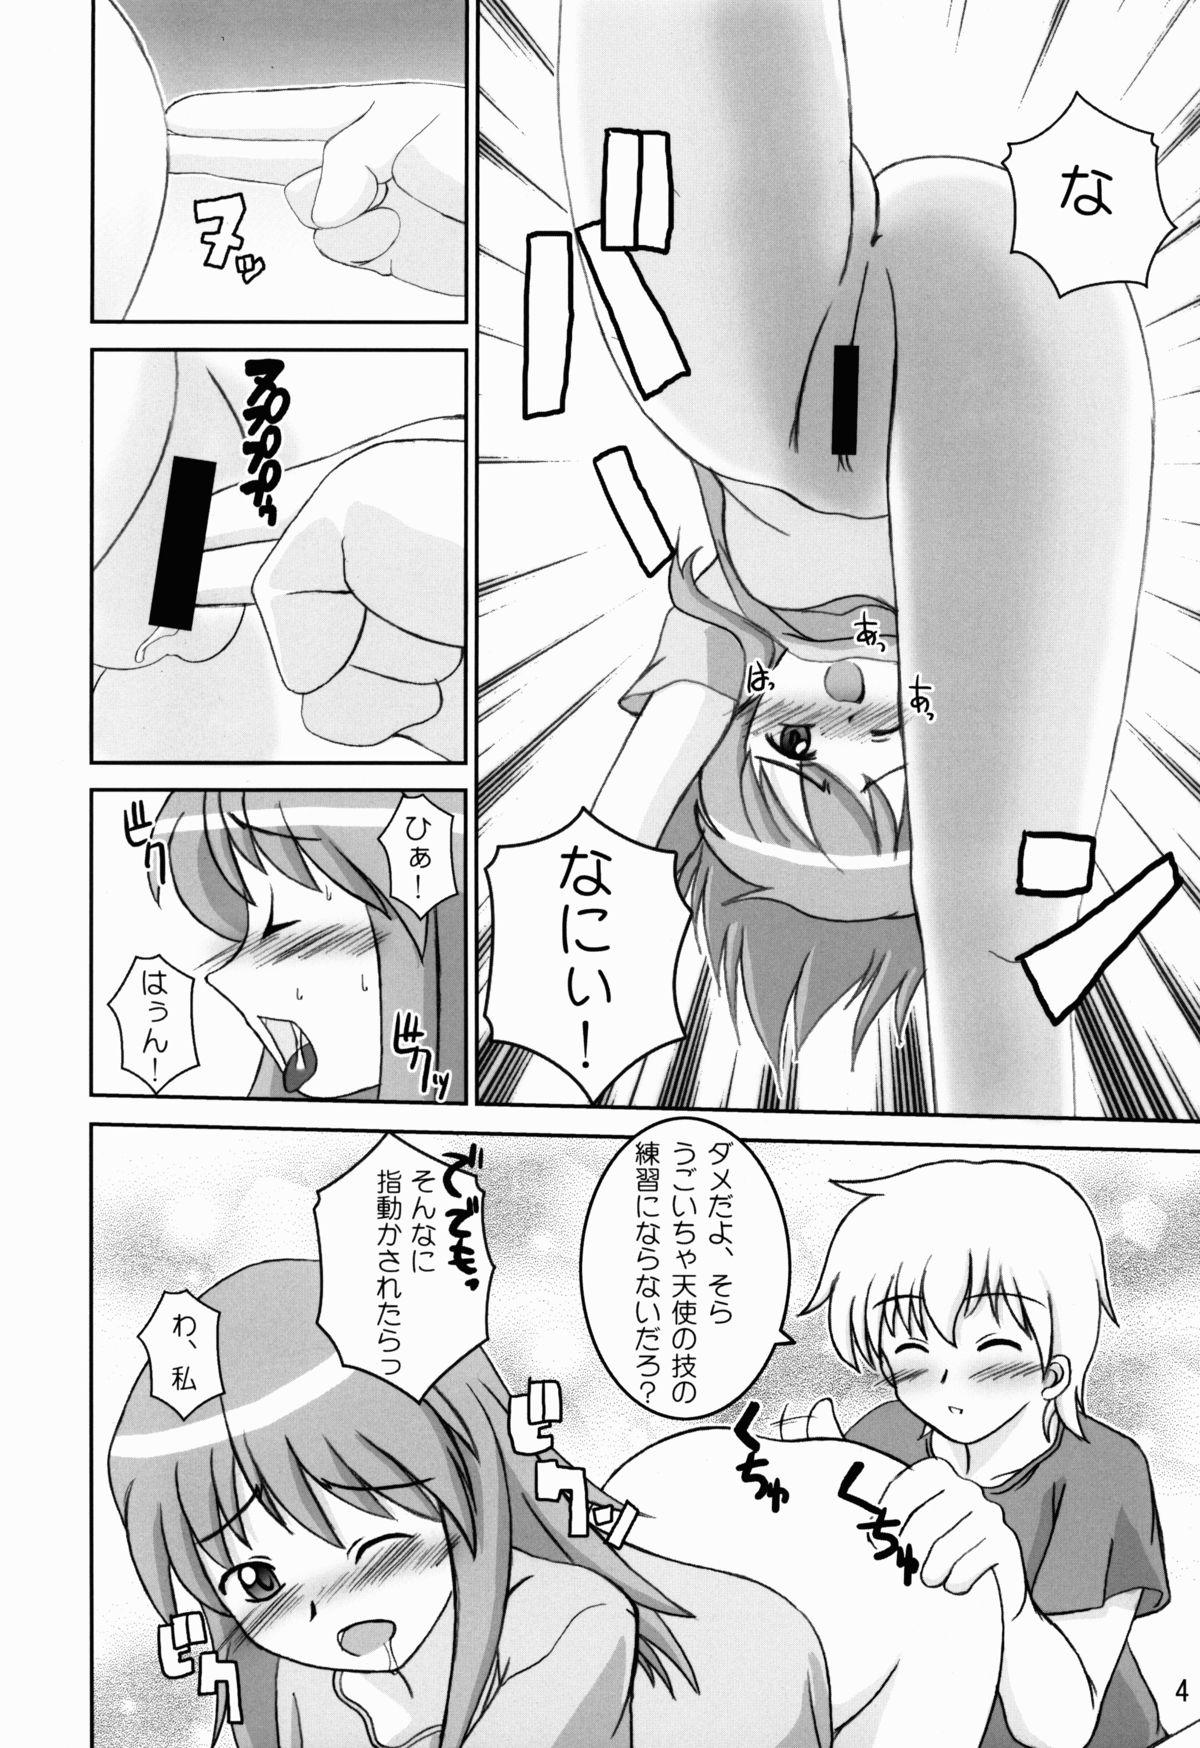 Asia Rosetta Star Second Stage - Kaleido star Thot - Page 4